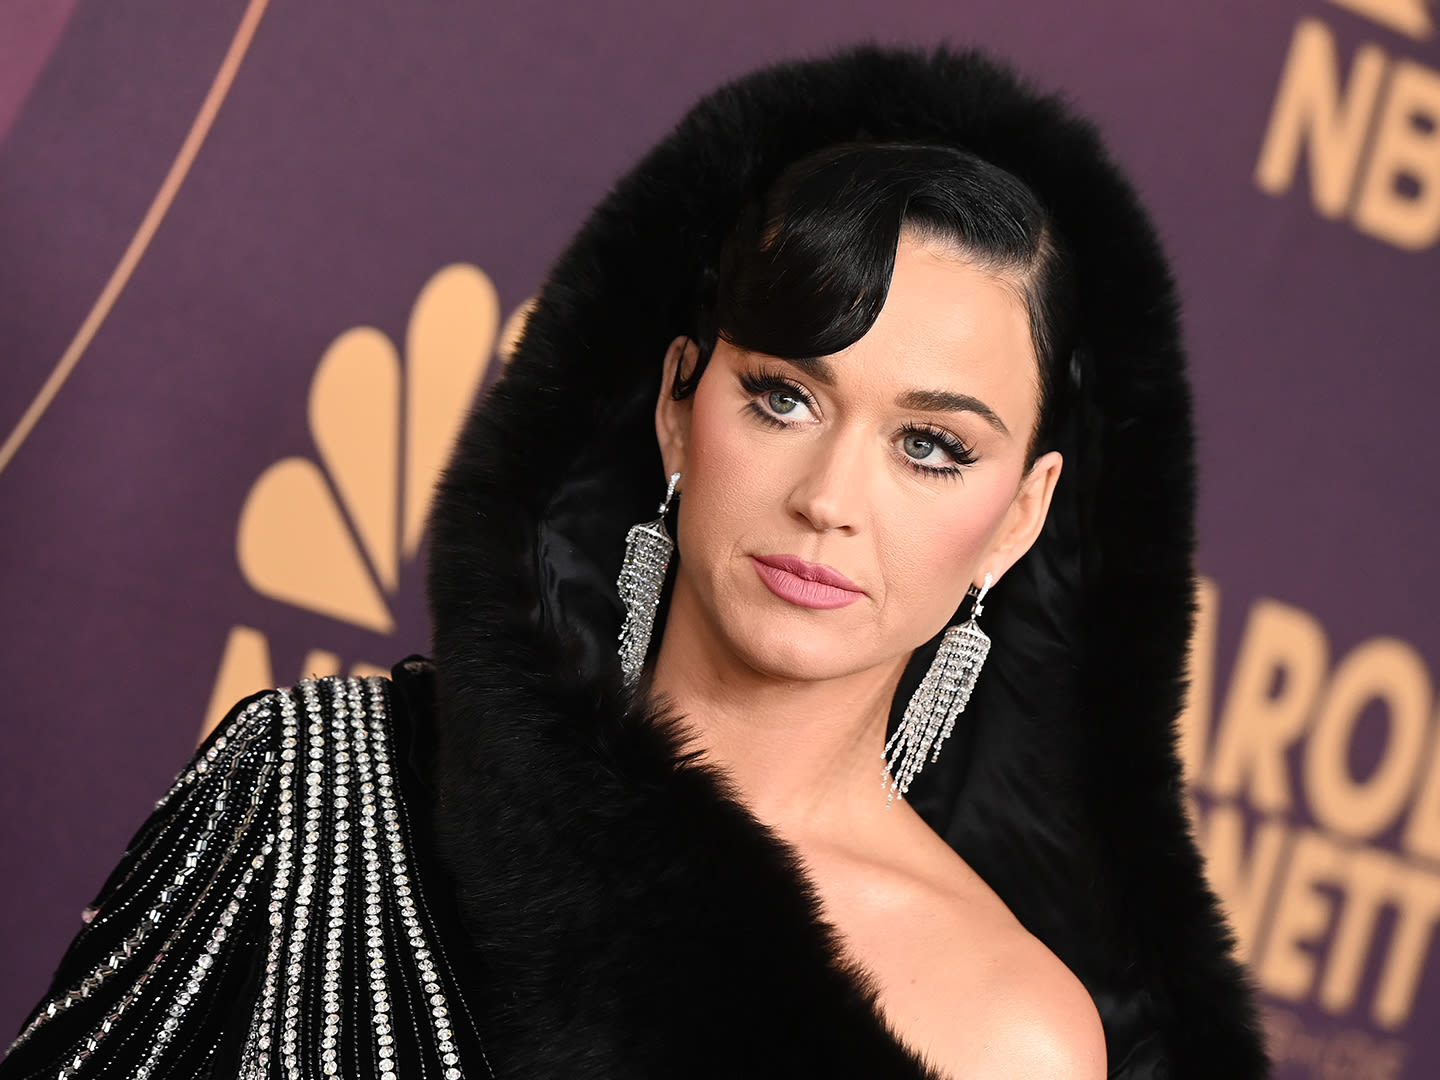 Katy Perry Second Complicated Real Estate Legal Battle Reaches an End